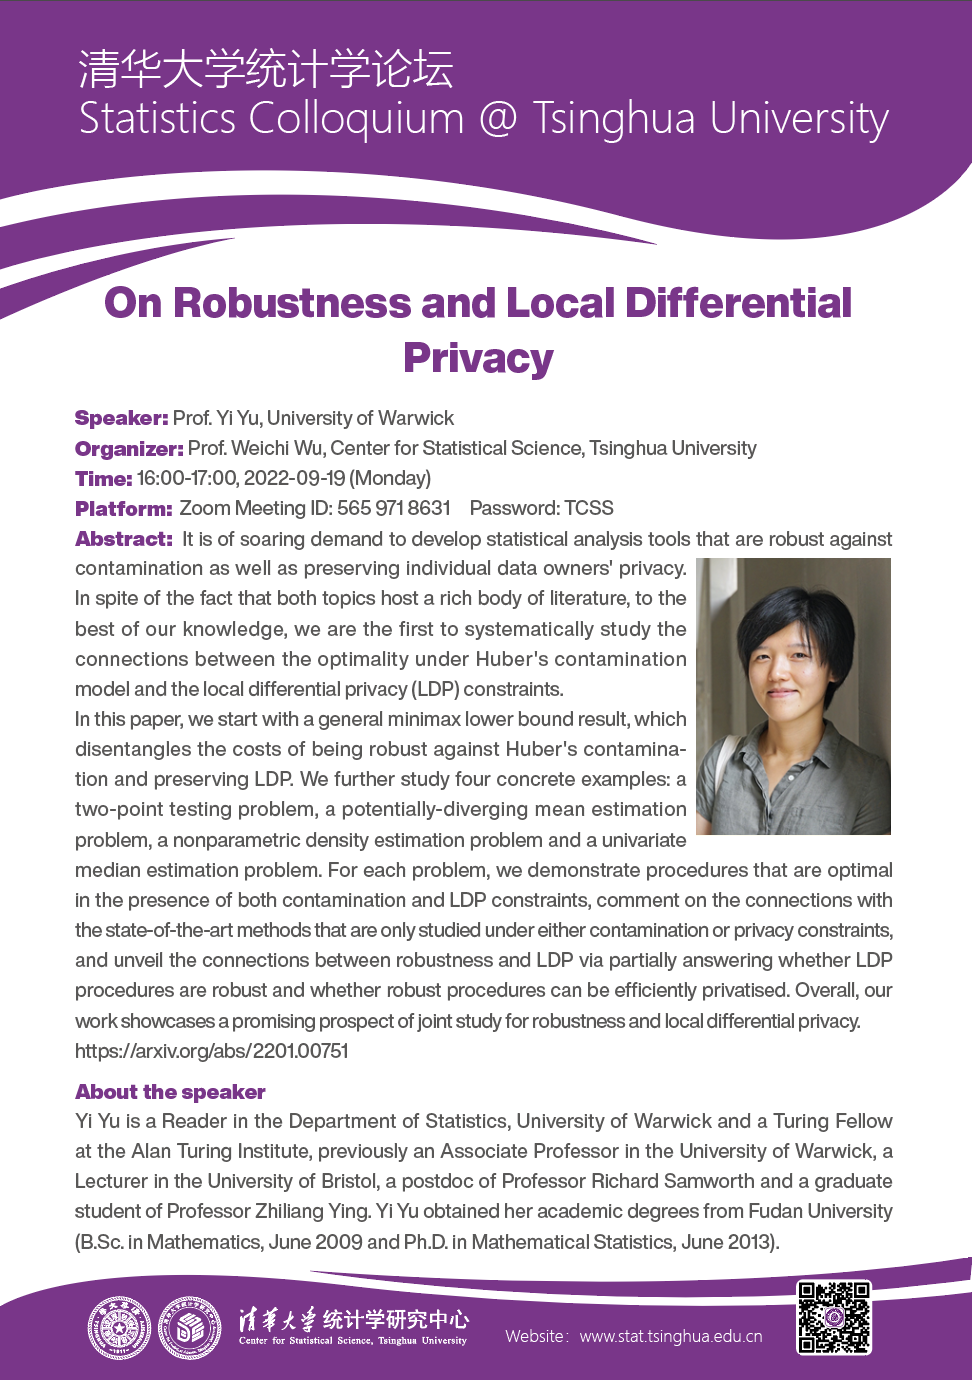 On Robustness and Local Differential Privacy